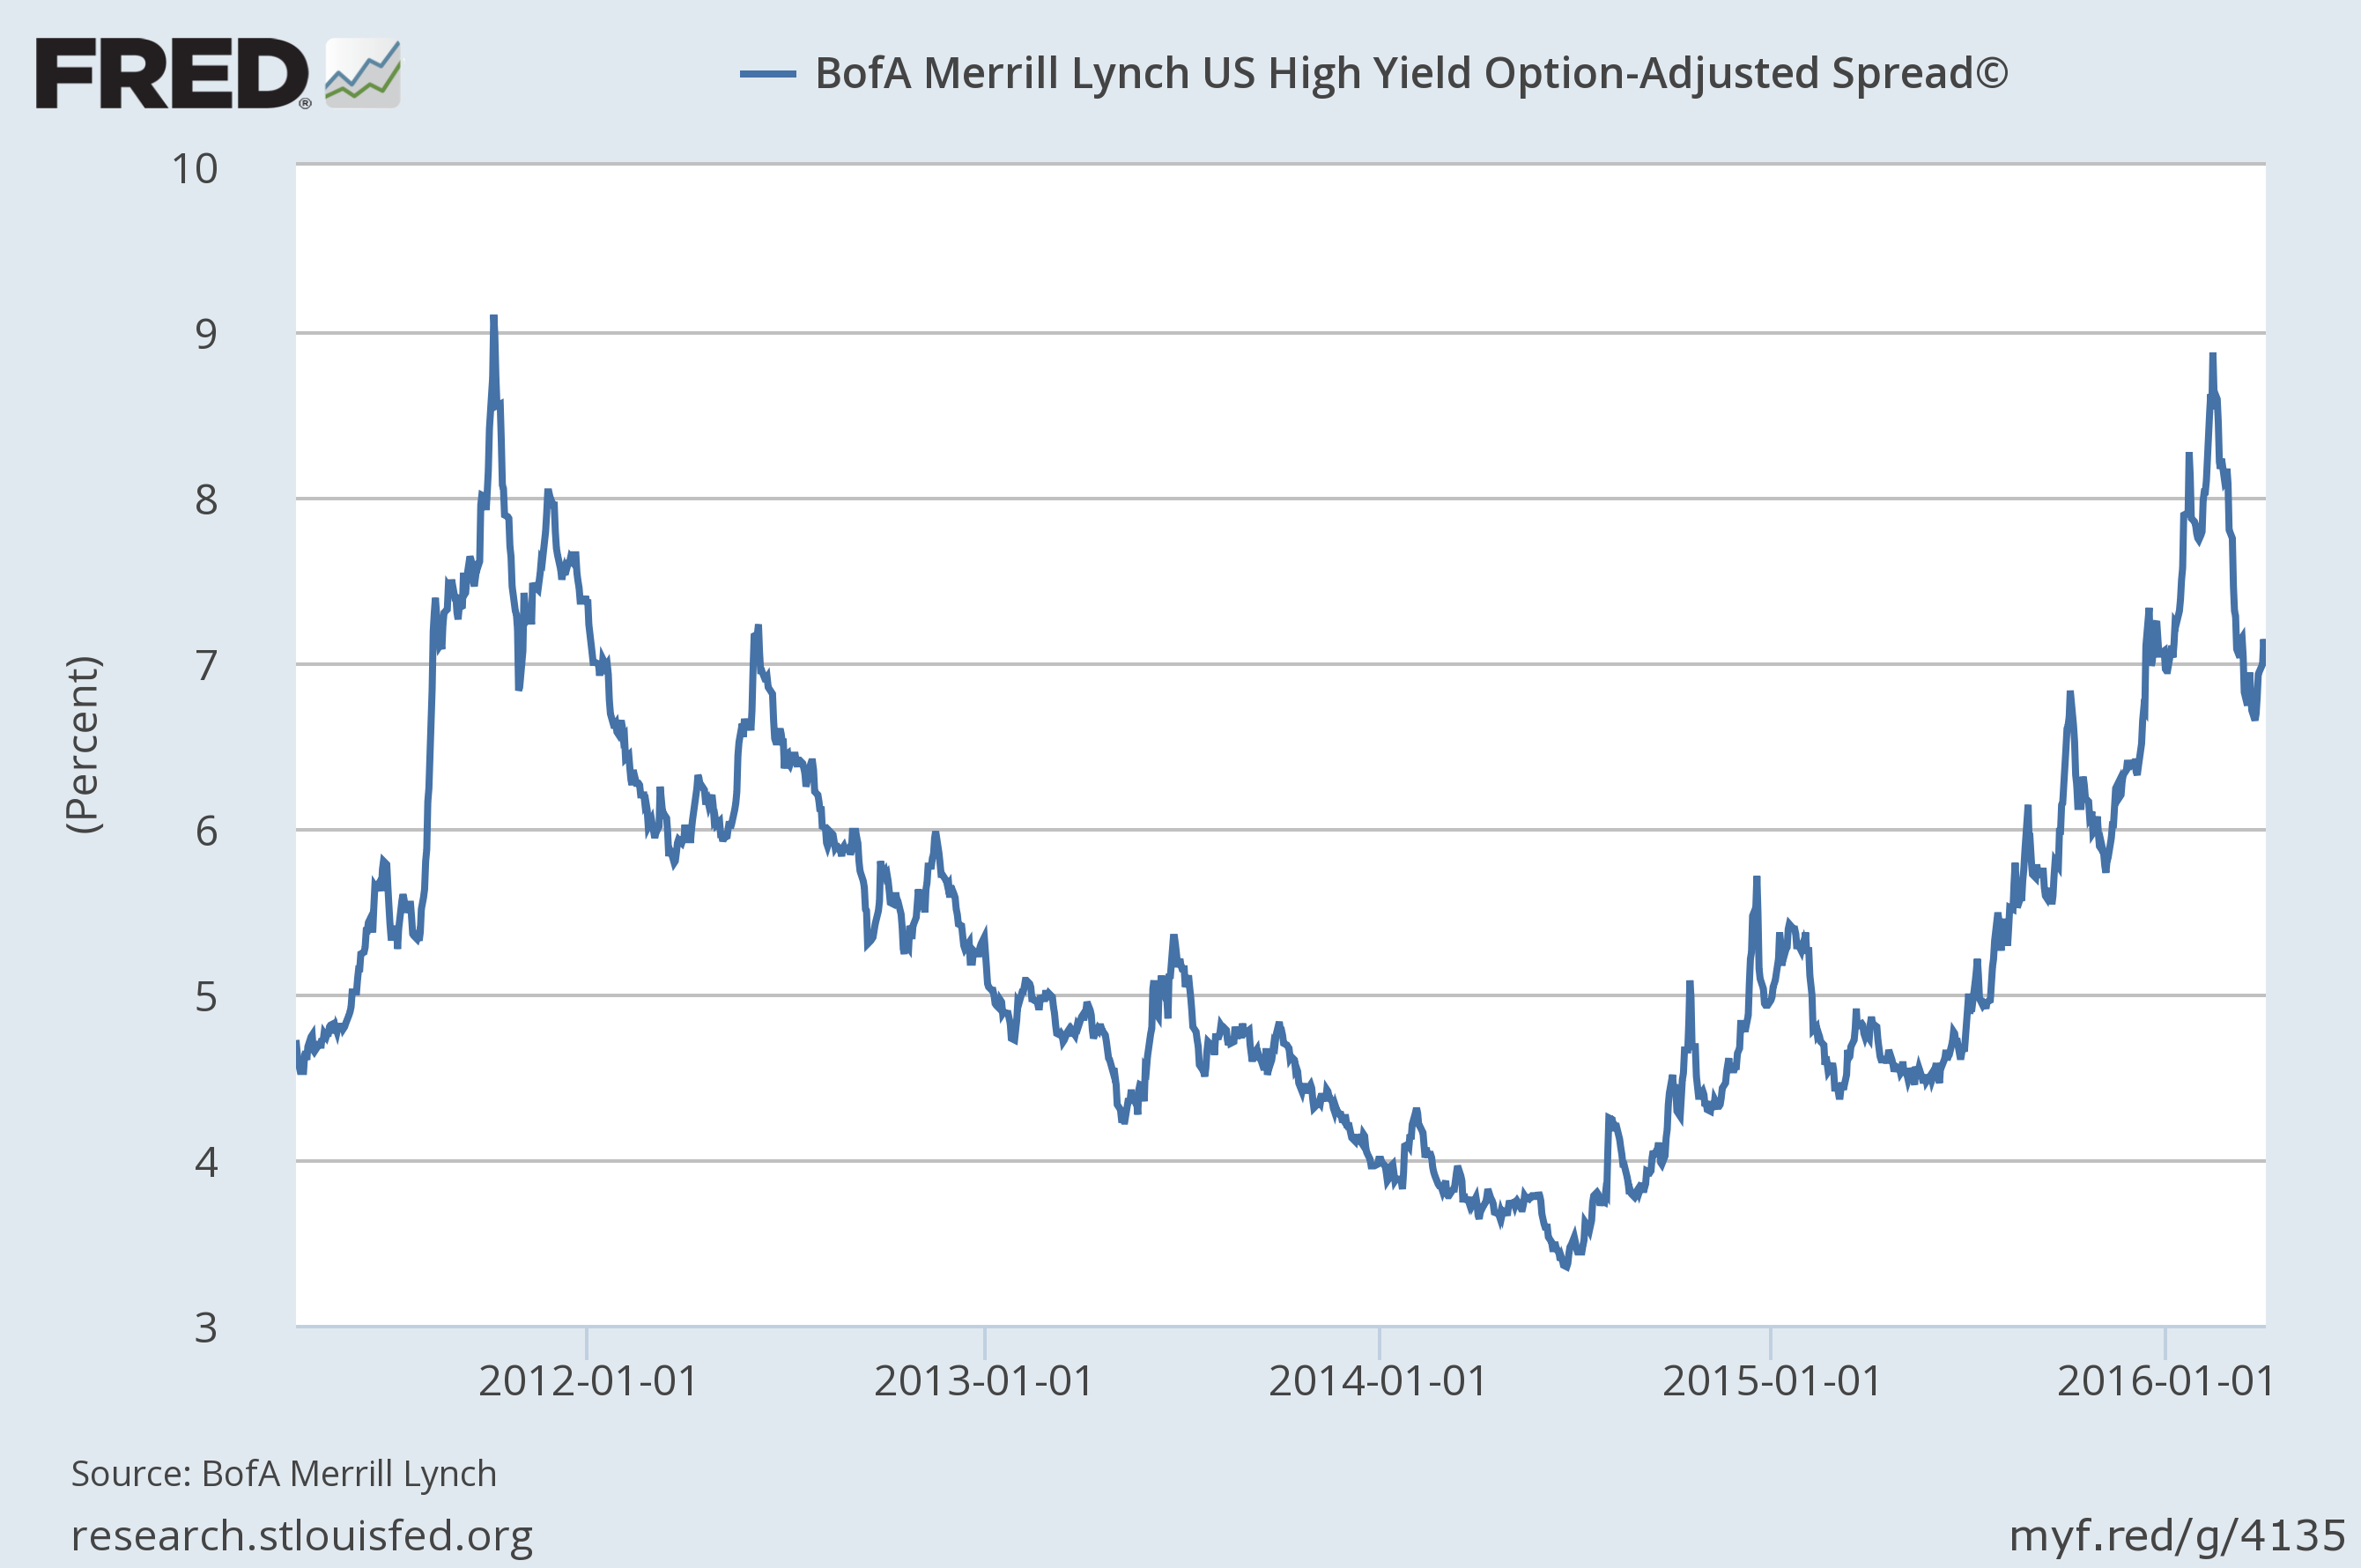 Credit Spreads Have Resumed Widening Trend